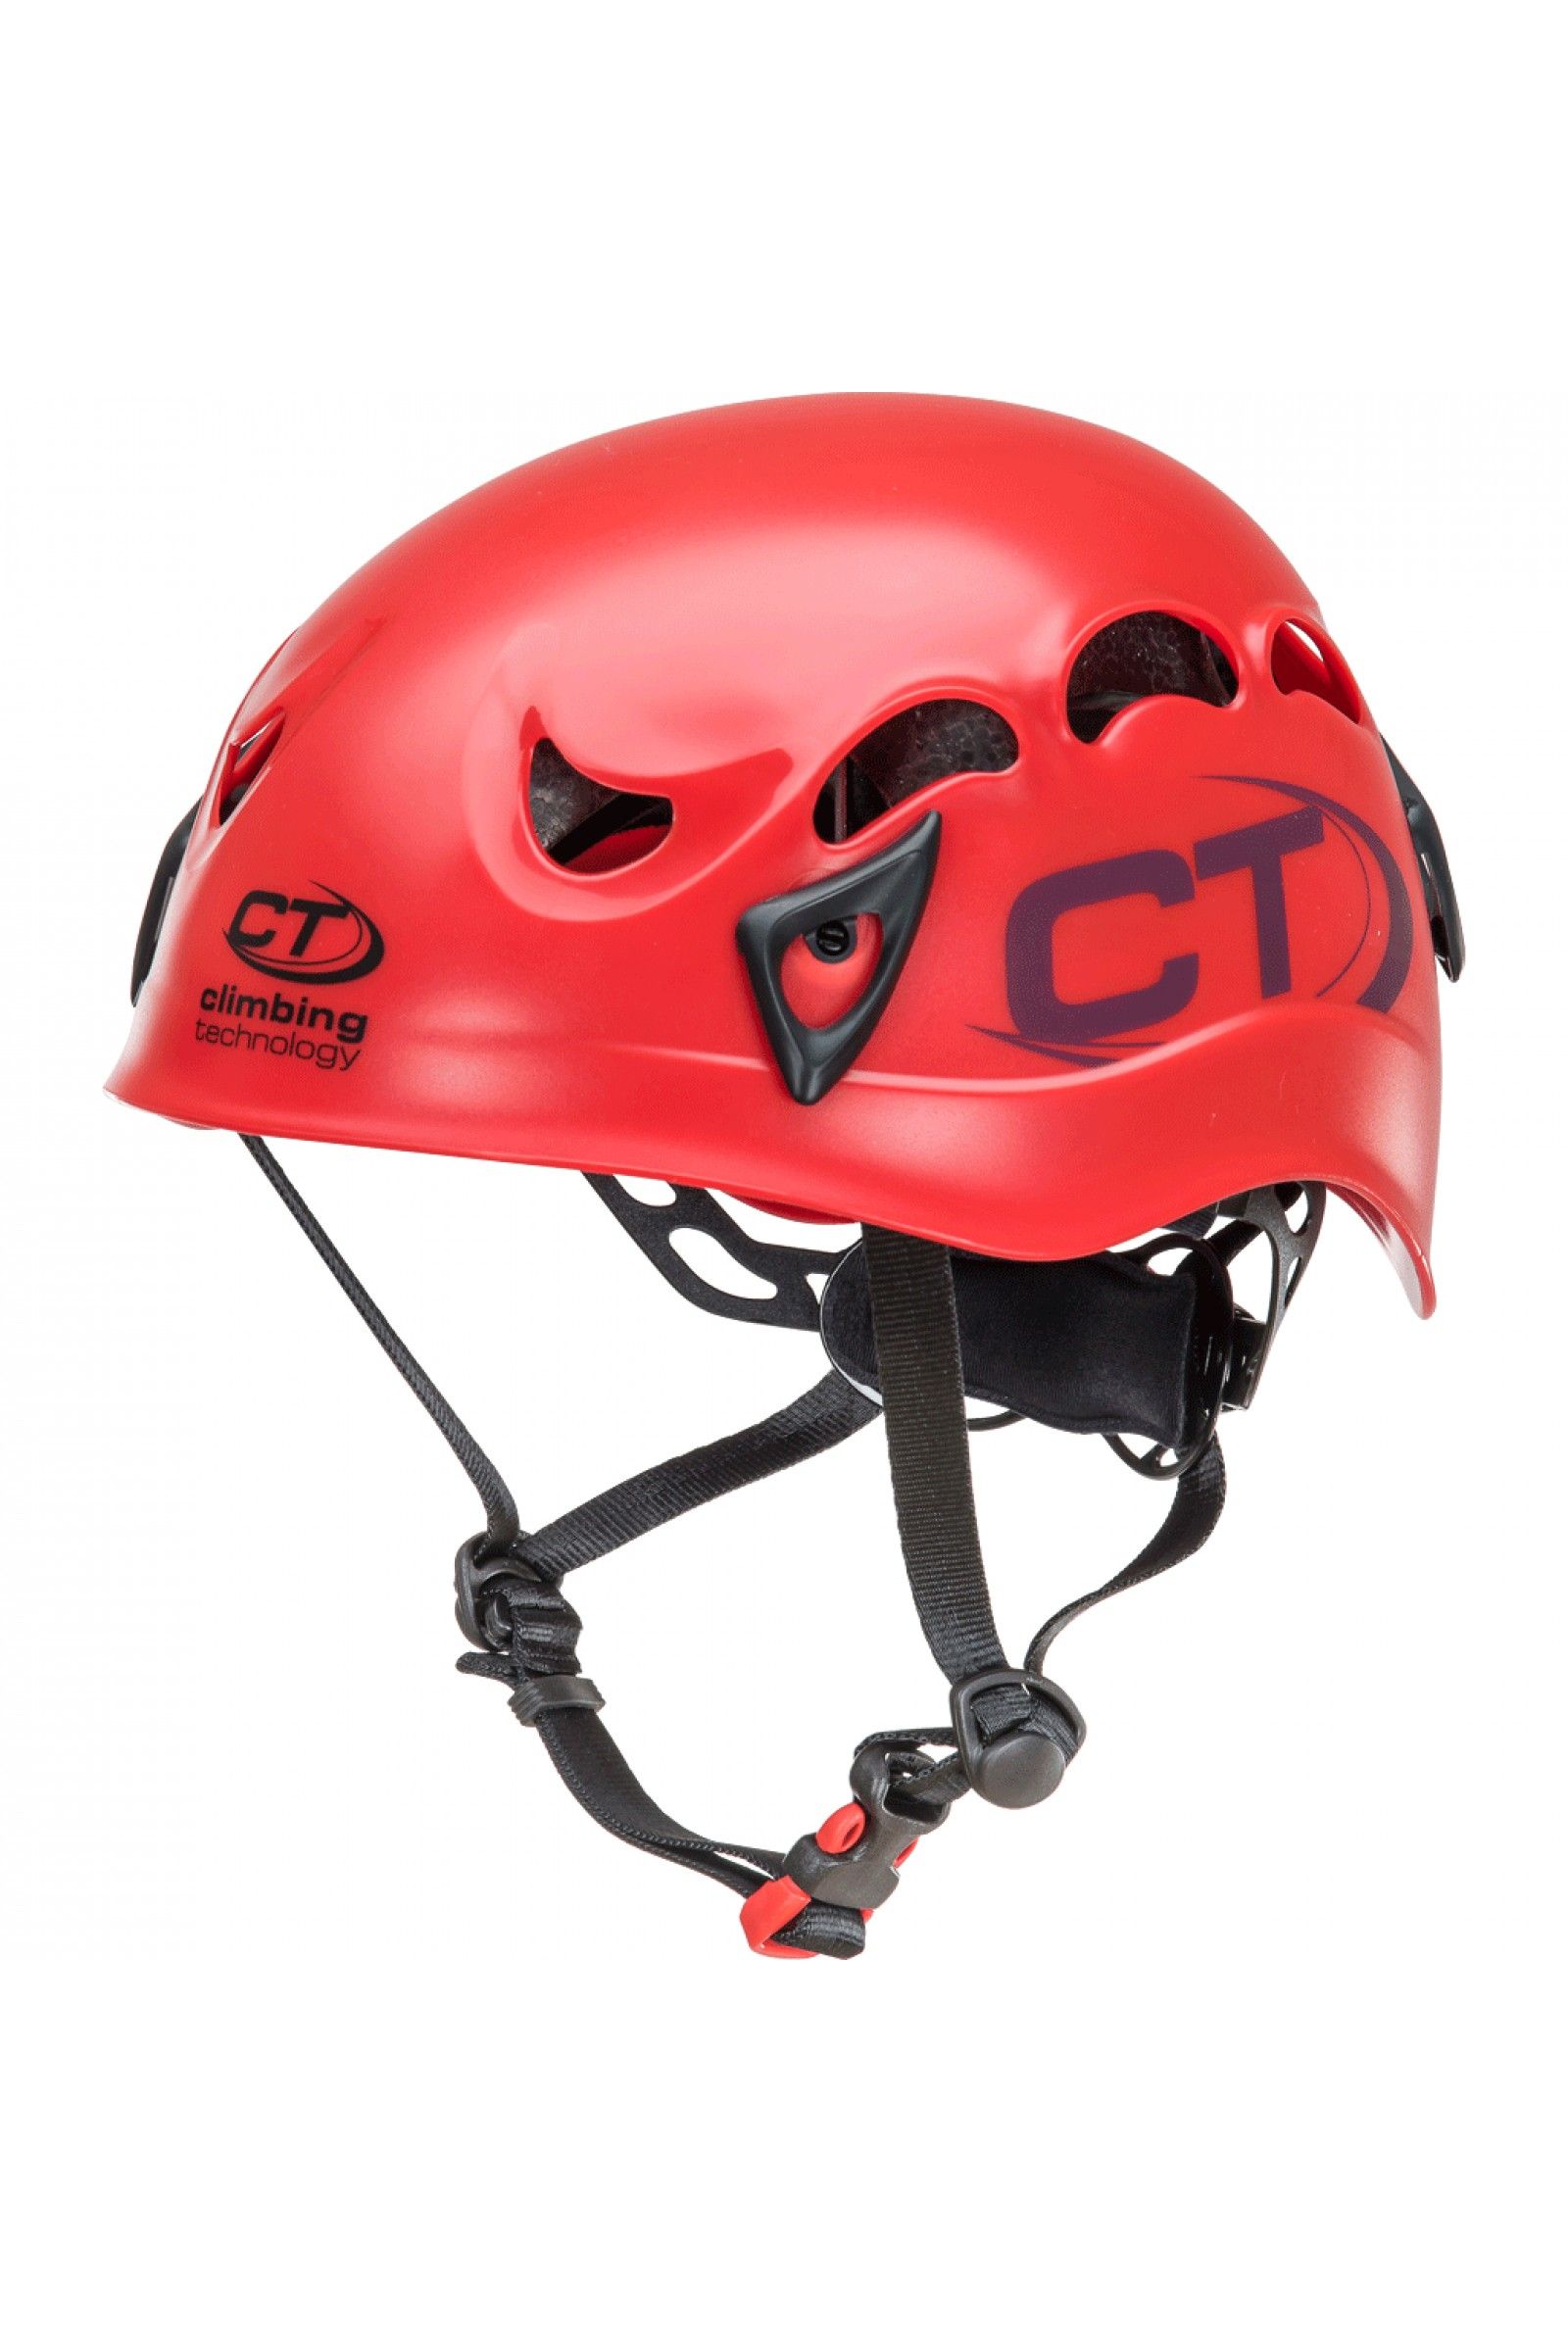 KASK GALAXY - RED